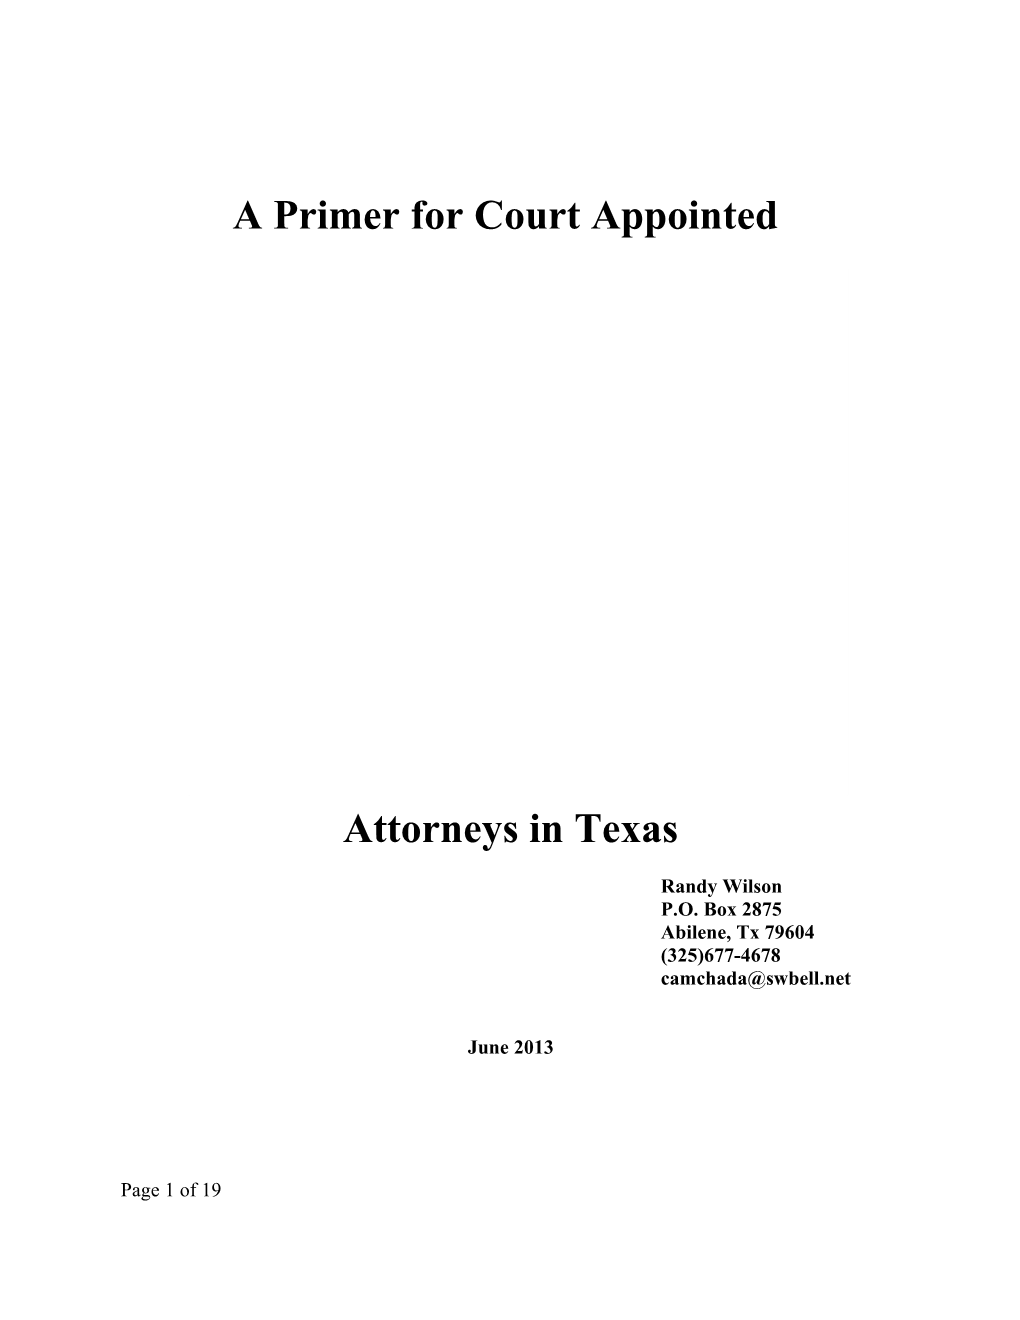 A Primer for Court Appointed